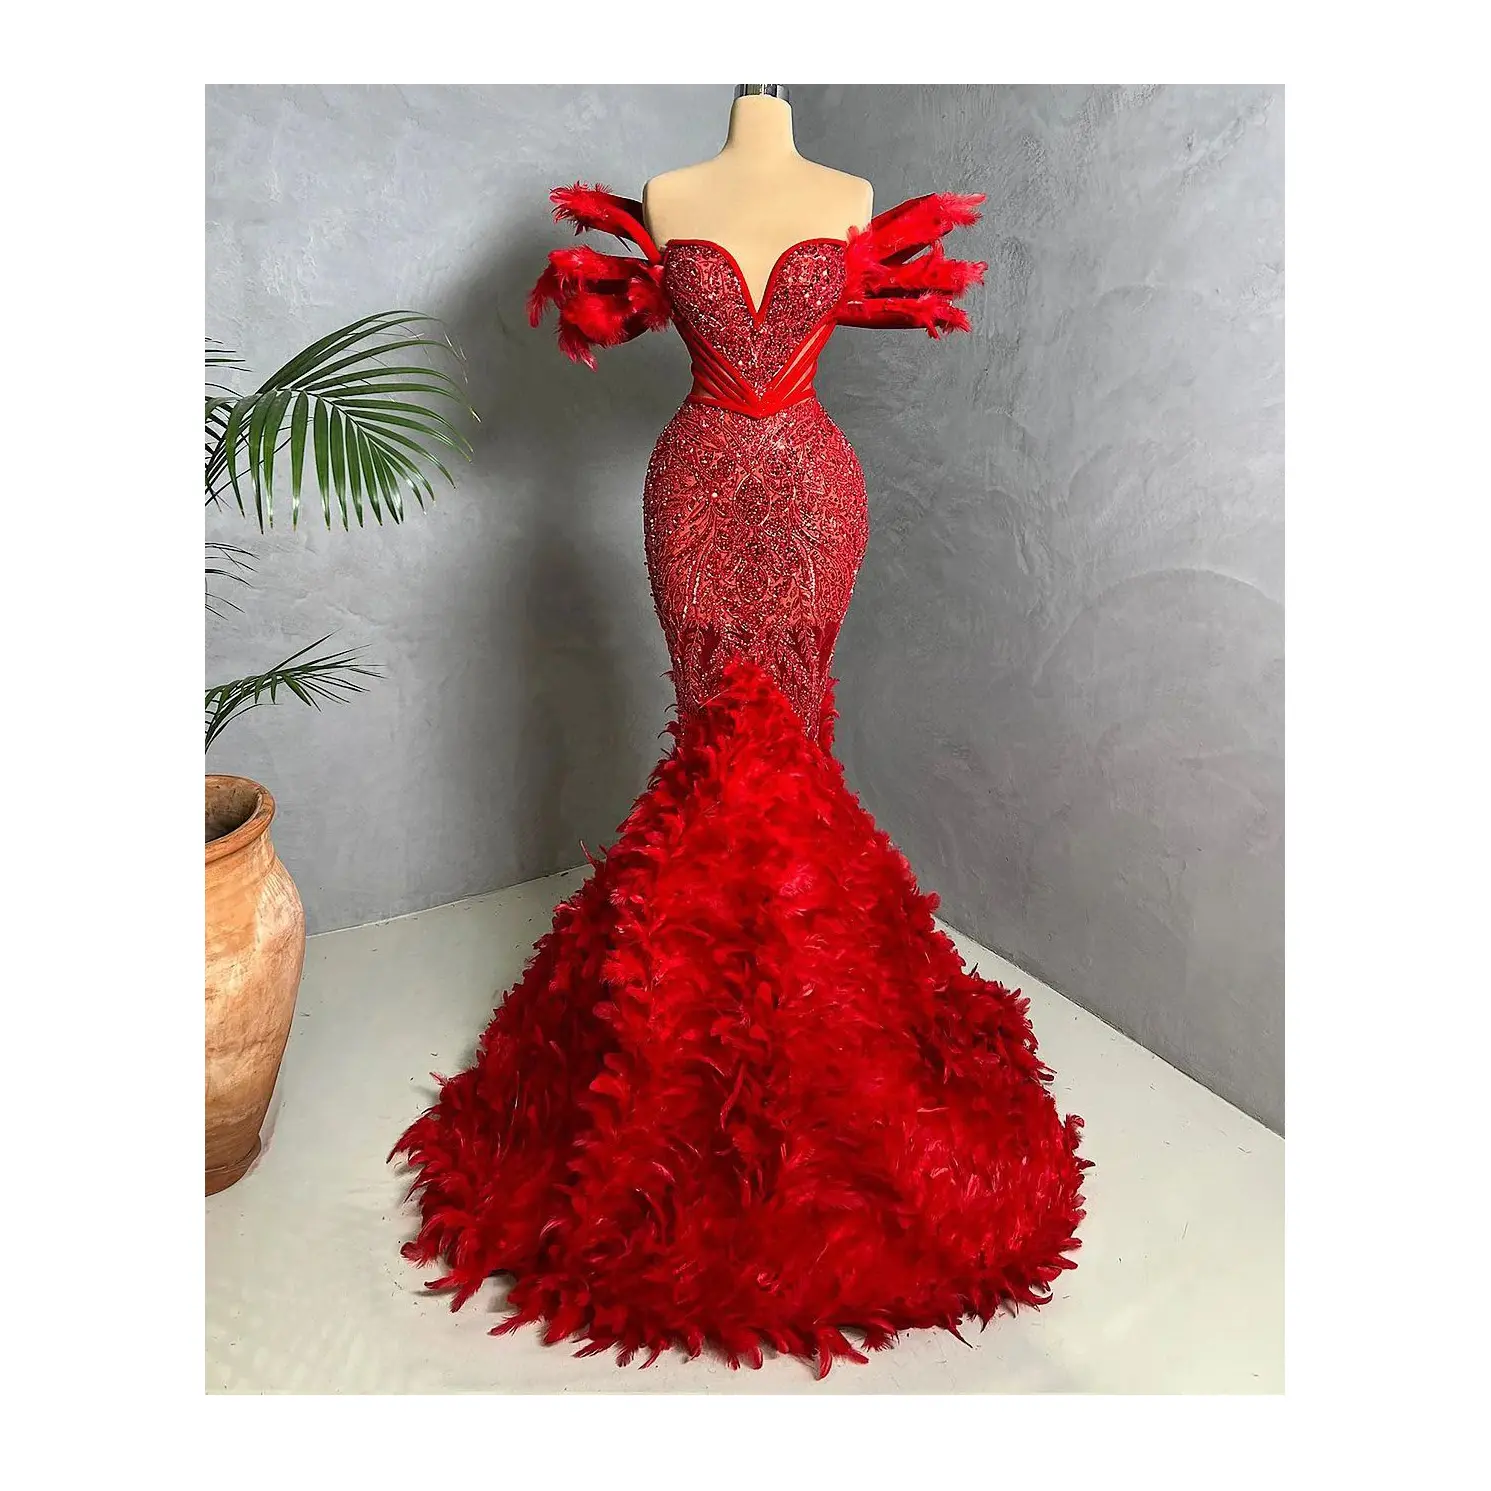 V-Neck Red Feather Shoulder Long Prom Dress High Quality Fashion Women's Party Dress